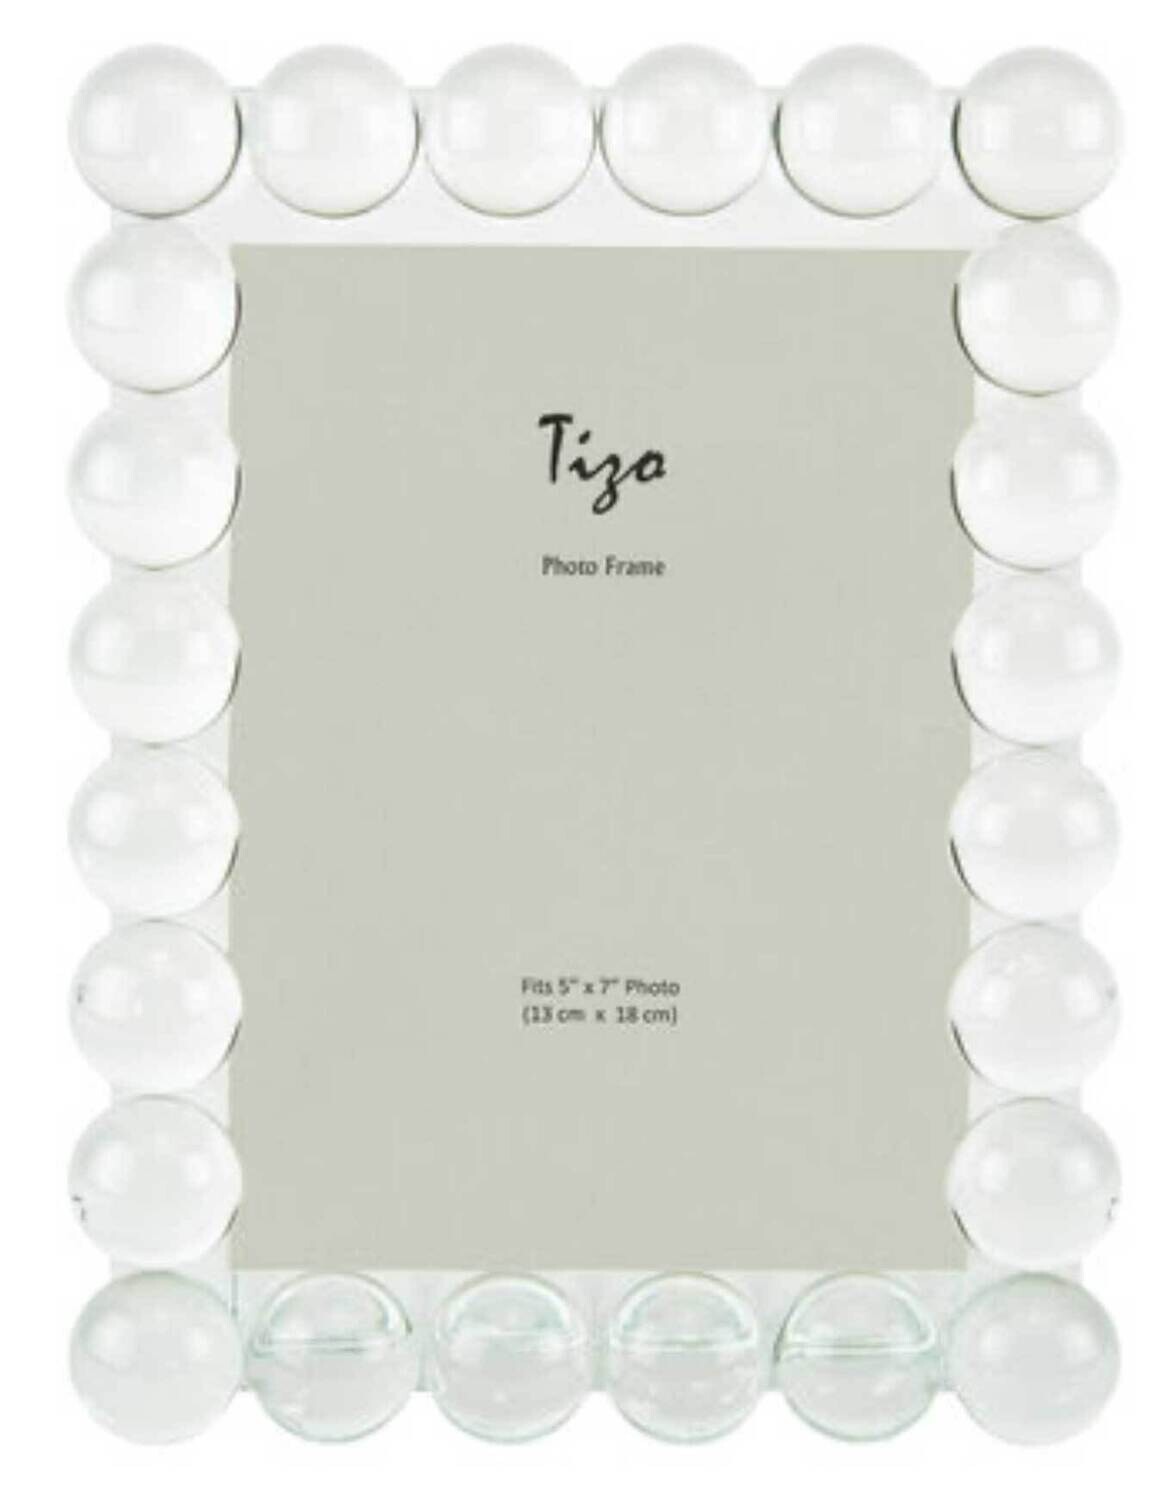 Tizo Single Bubble 5 x 7 Inch Crystal Glass Picture Frame PH1880-57